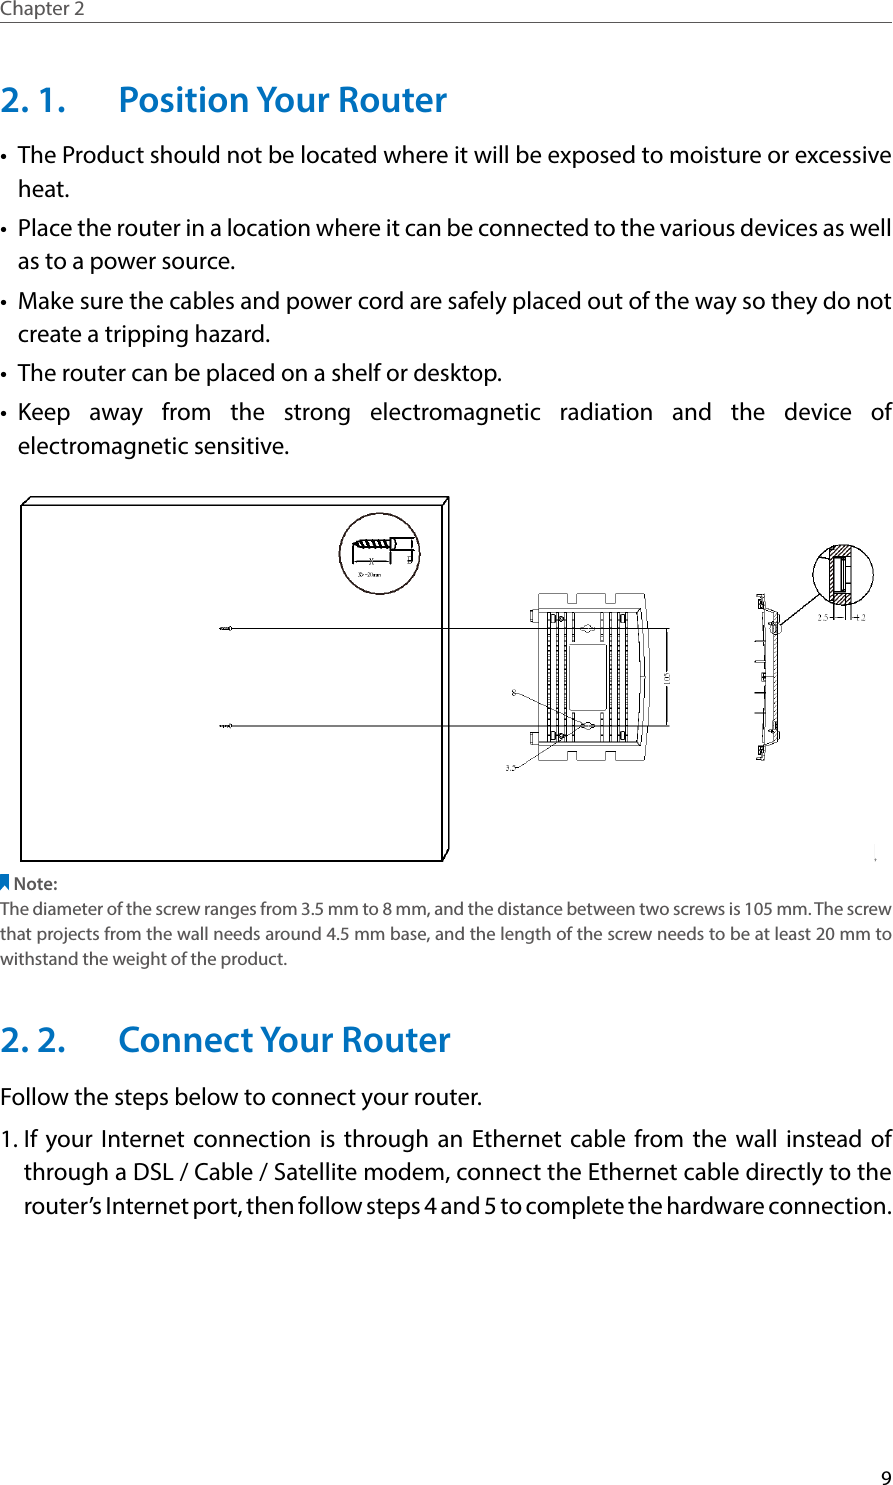 9Chapter 2  2. 1.  Position Your Router•  The Product should not be located where it will be exposed to moisture or excessive heat.•  Place the router in a location where it can be connected to the various devices as well as to a power source.•  Make sure the cables and power cord are safely placed out of the way so they do not create a tripping hazard.•  The router can be placed on a shelf or desktop.•  Keep away from the strong electromagnetic radiation and the device of electromagnetic sensitive.Note:The diameter of the screw ranges from 3.5 mm to 8 mm, and the distance between two screws is 105 mm. The screw that projects from the wall needs around 4.5 mm base, and the length of the screw needs to be at least 20 mm to withstand the weight of the product.2. 2.  Connect Your RouterFollow the steps below to connect your router.1. If your Internet connection is through an Ethernet cable from the wall instead of through a DSL / Cable / Satellite modem, connect the Ethernet cable directly to the router’s Internet port, then follow steps 4 and 5 to complete the hardware connection.